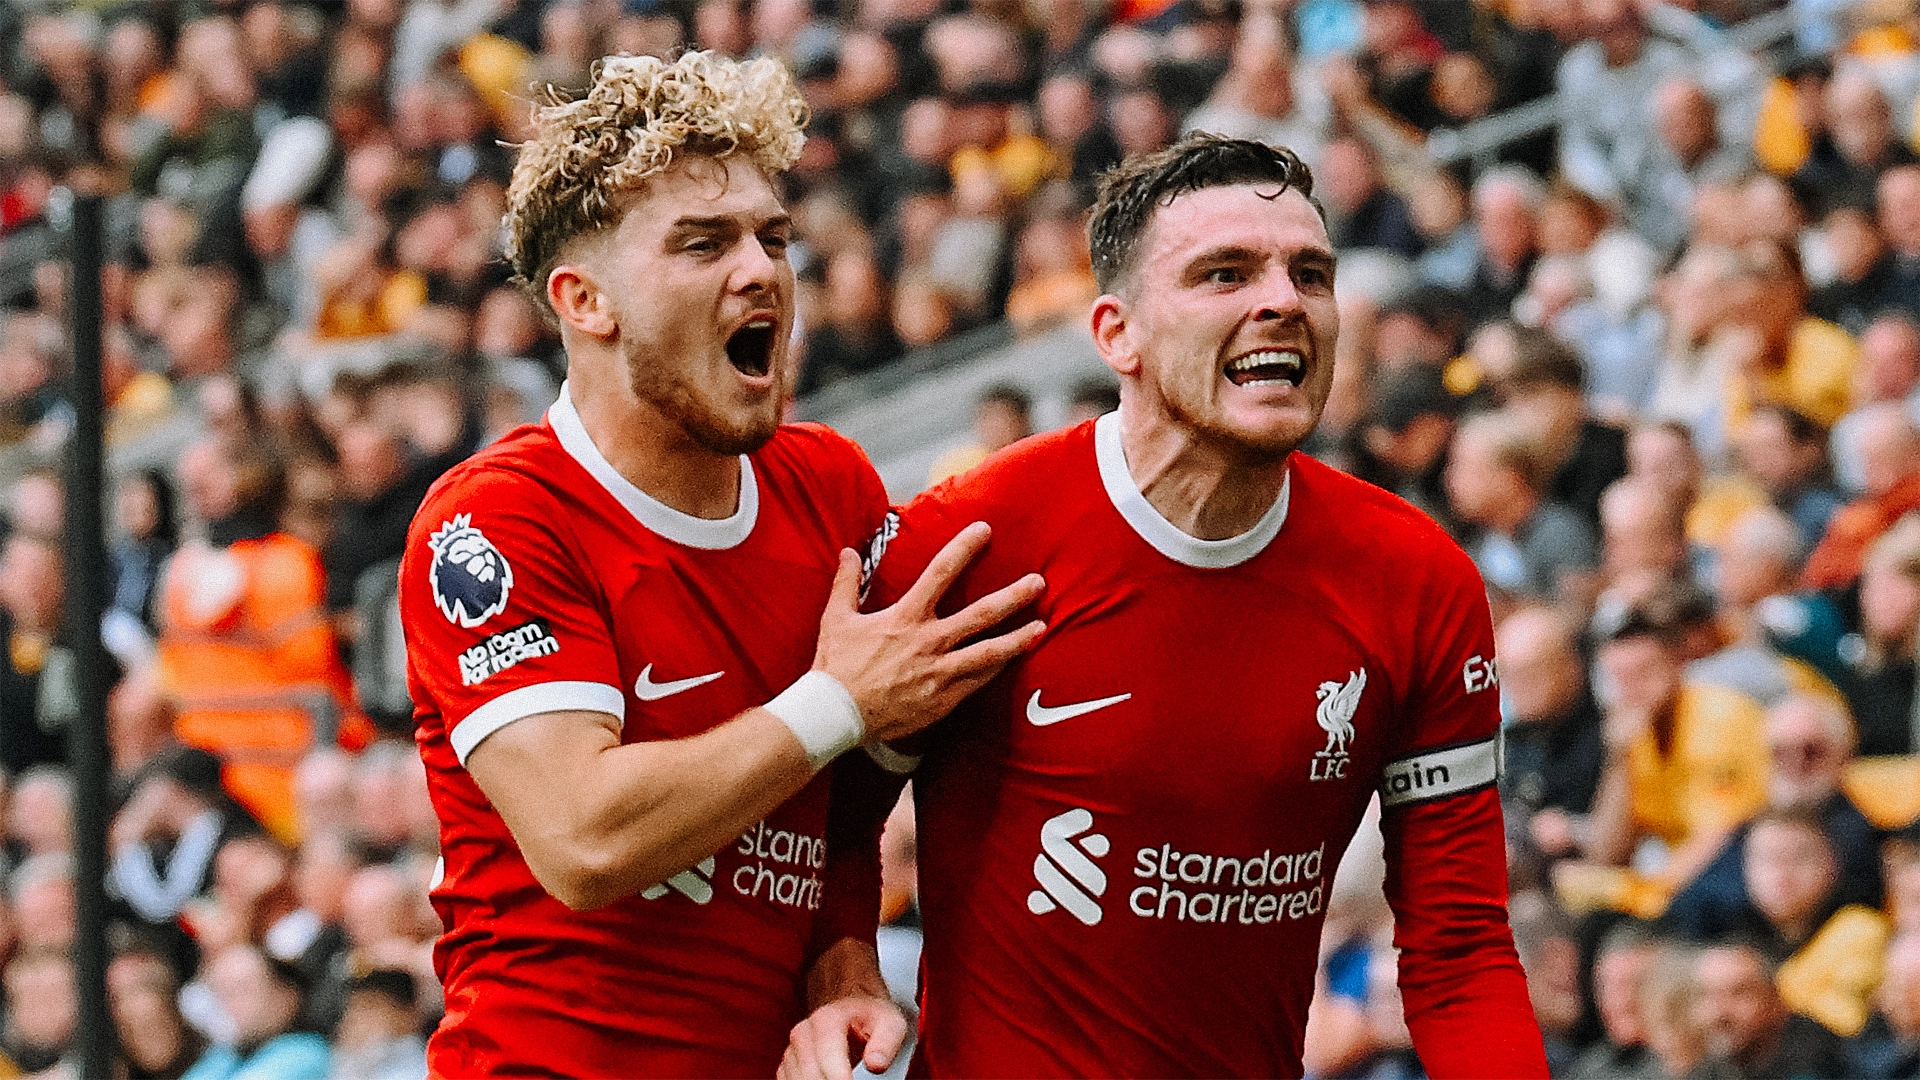 Wolves 1-3 Liverpool Watch free highlights